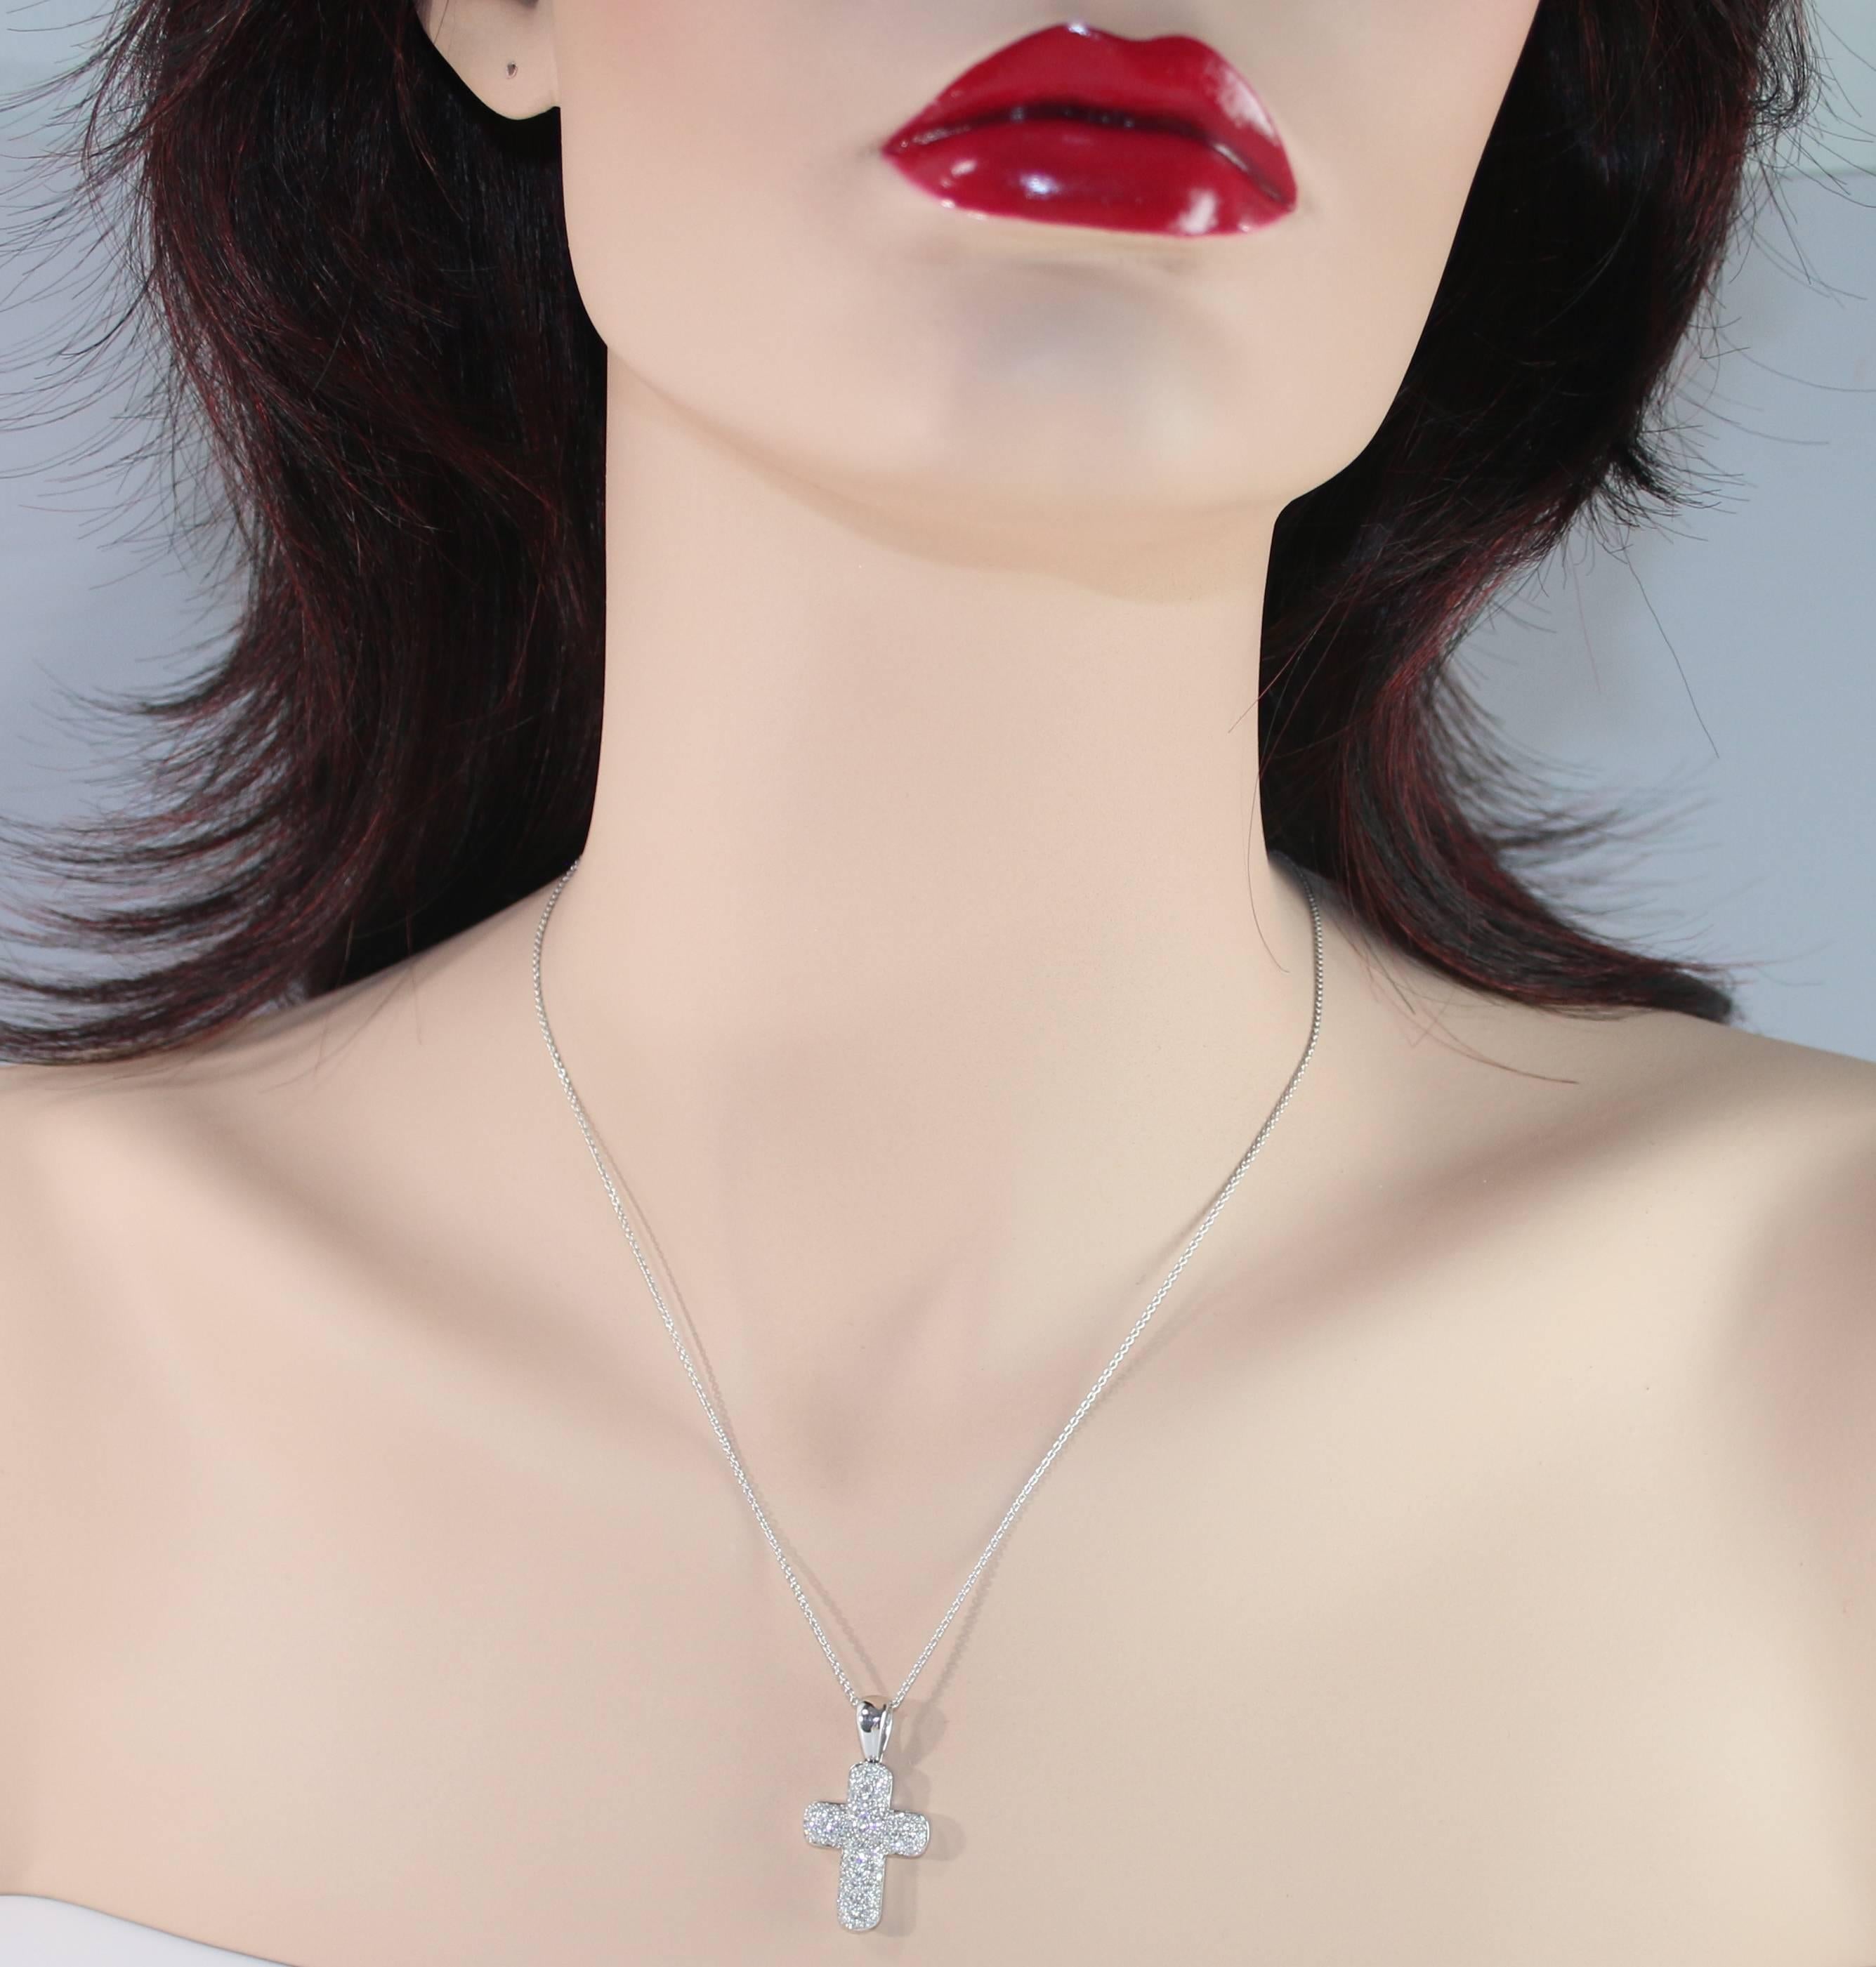 The cross is is 18K White Gold
There are 1.30 Carats in Diamonds F VVS
The cross is by DAMIANI made in Italy
The chain is 18K Gold Made in Italy
The cross with the bail measures 1.25